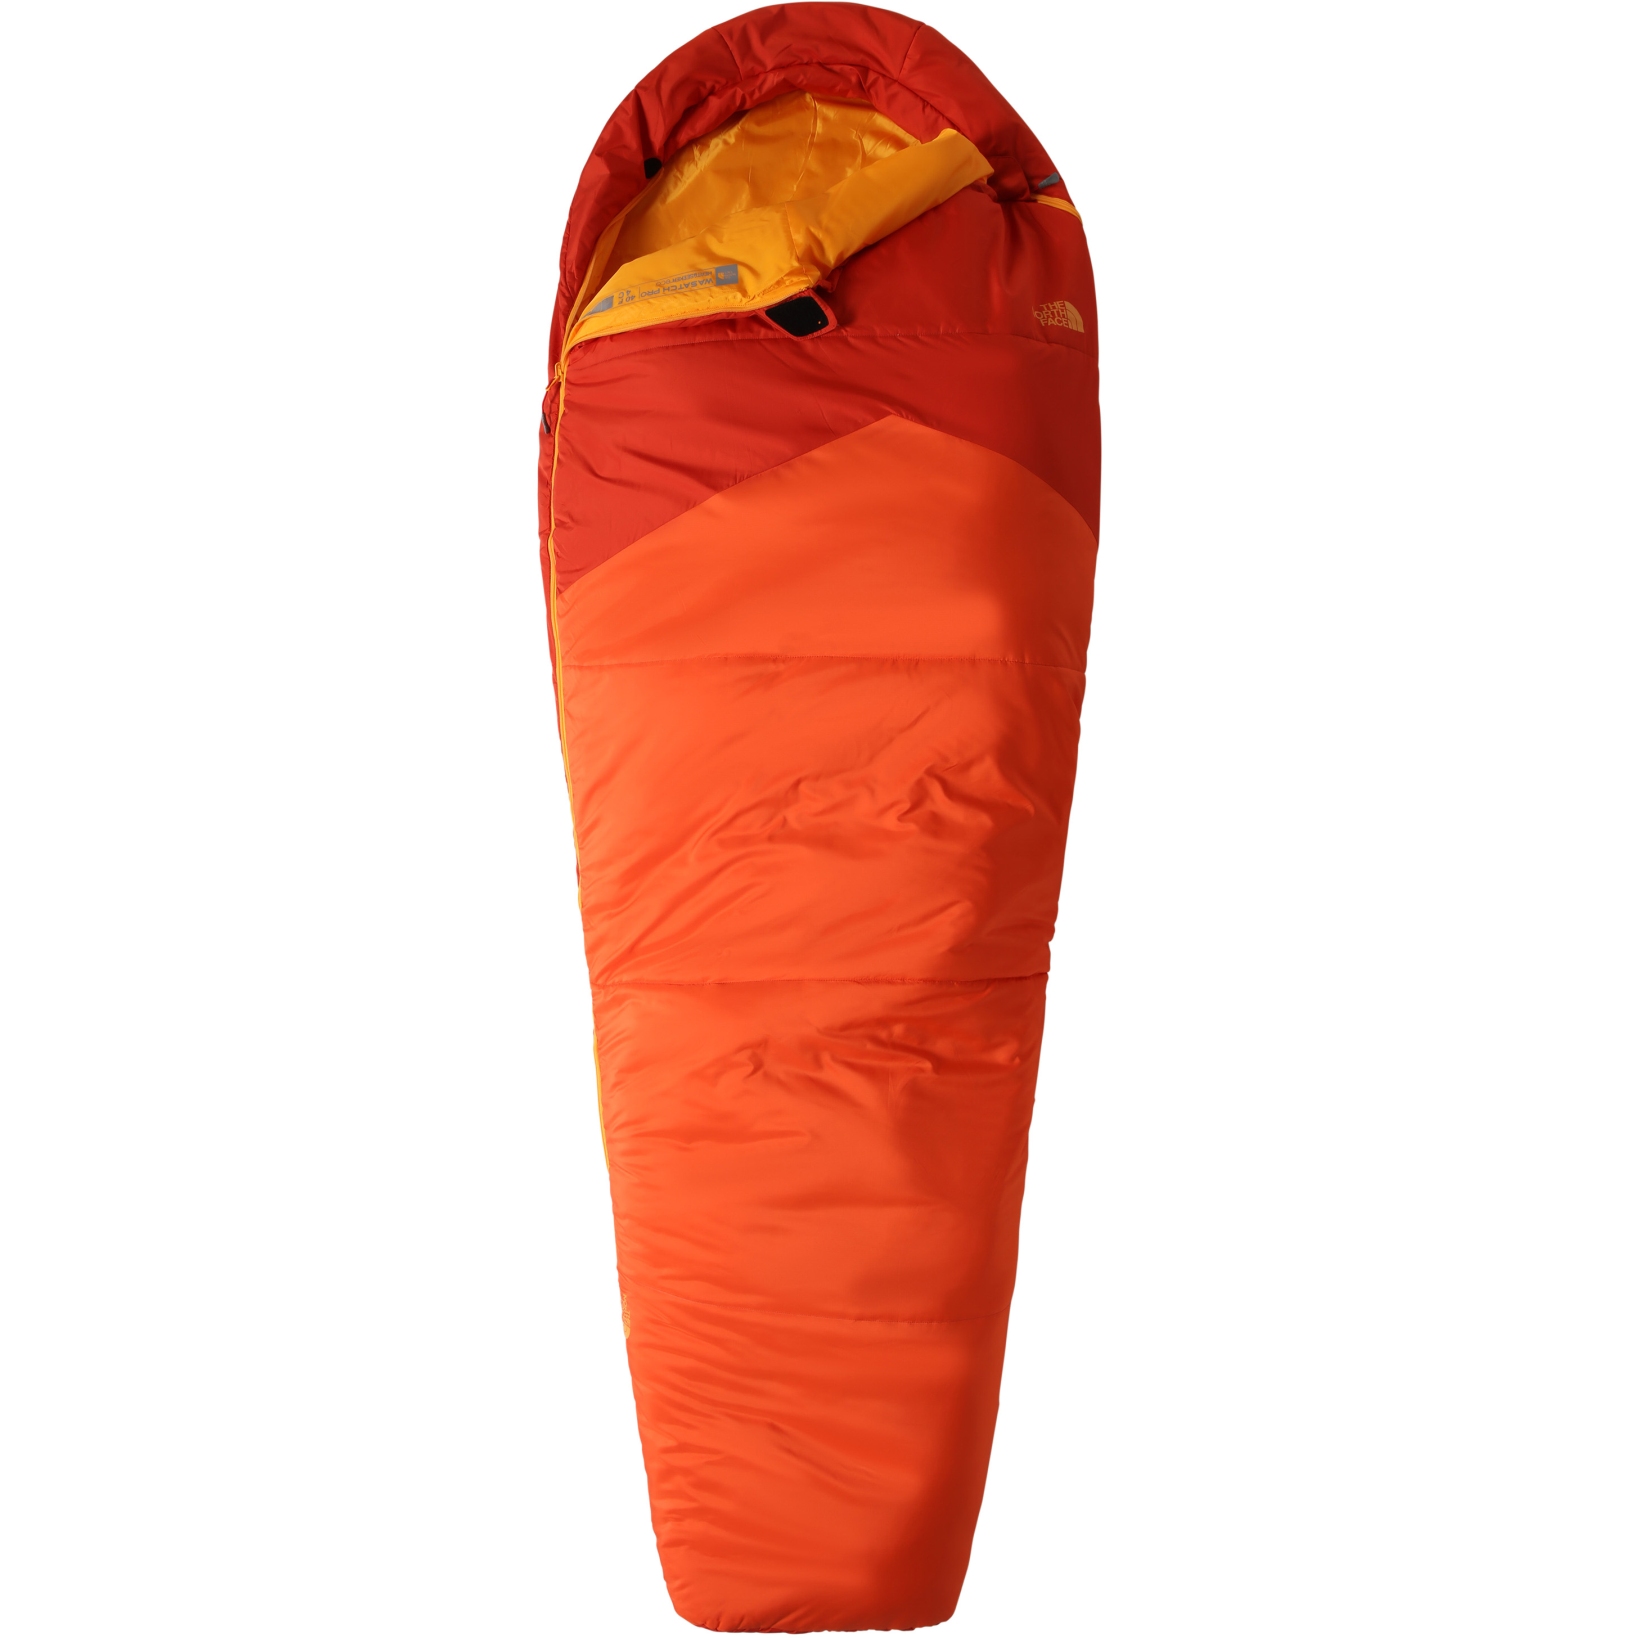 Picture of The North Face Wasatch Pro 4°C Sleeping Bag - Regular - Right Zip - Zion Orange/Persian Orange